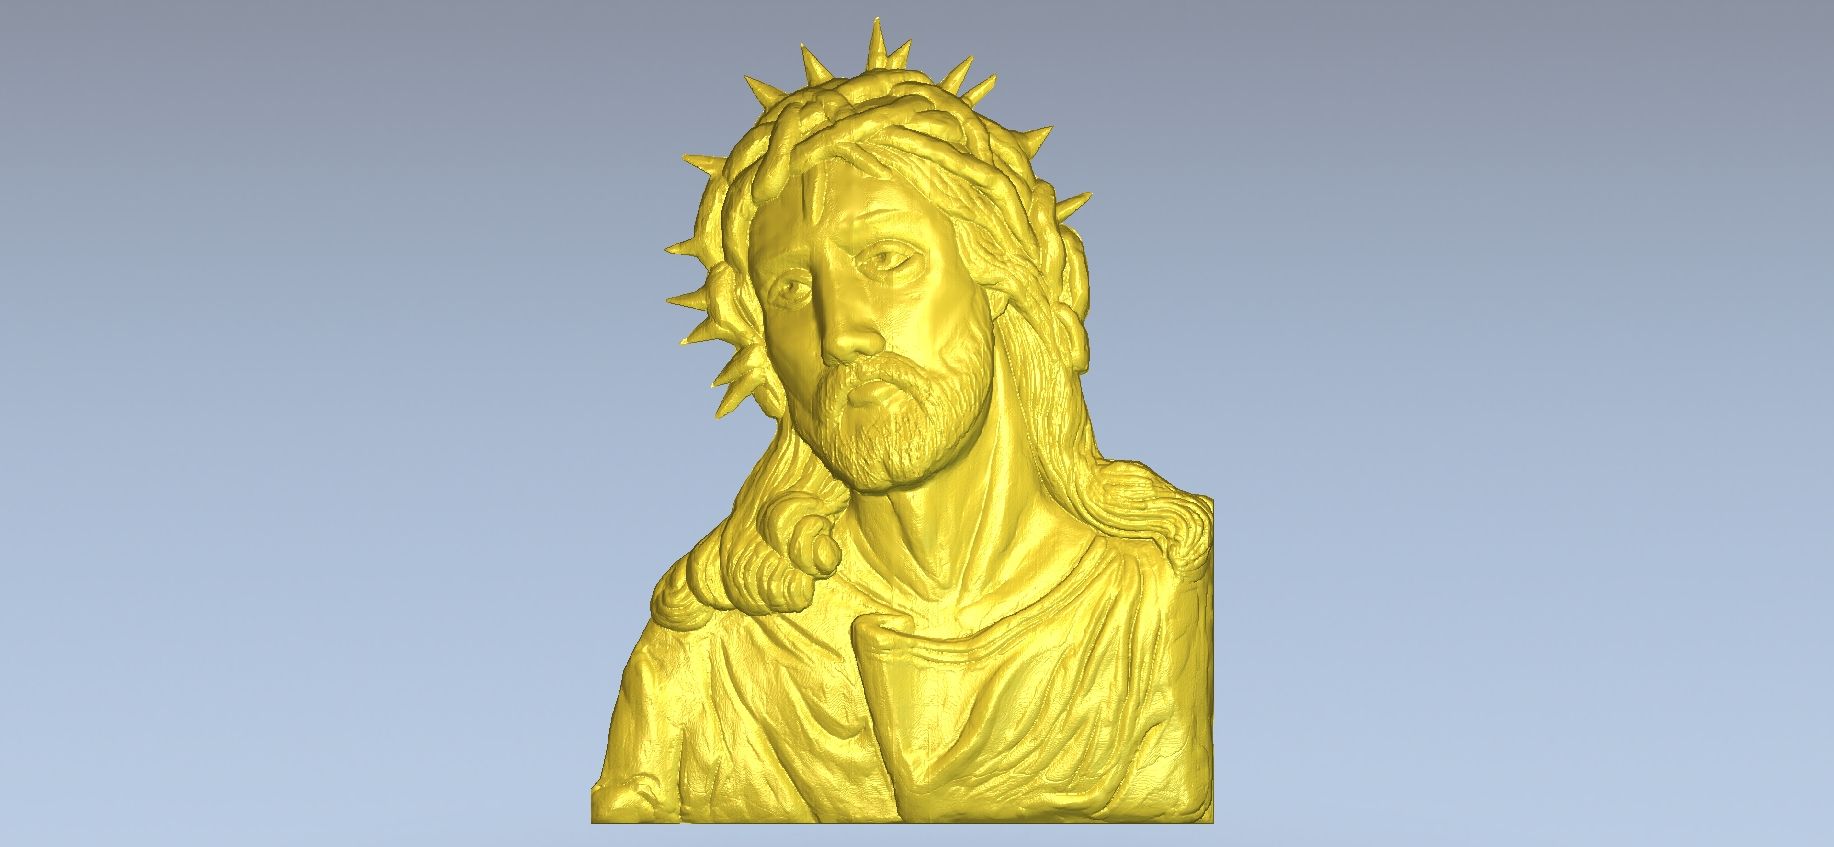 Christ 3d model relief download 1499 – DXF DOWNLOADS – Files for ...